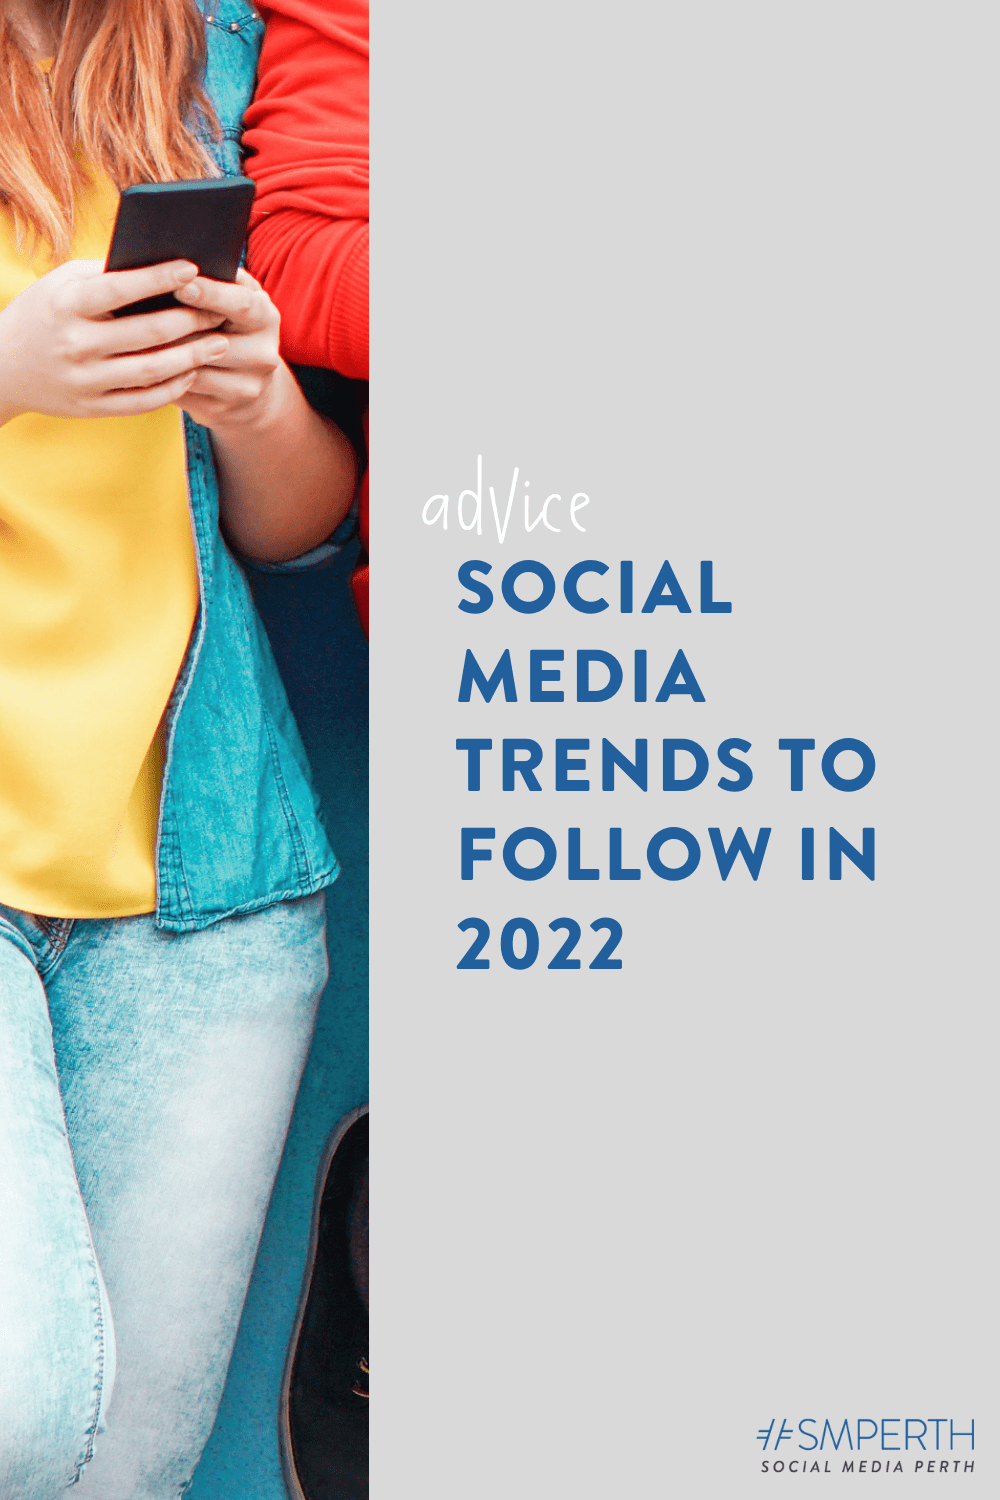 Social media trends to follow in 2022